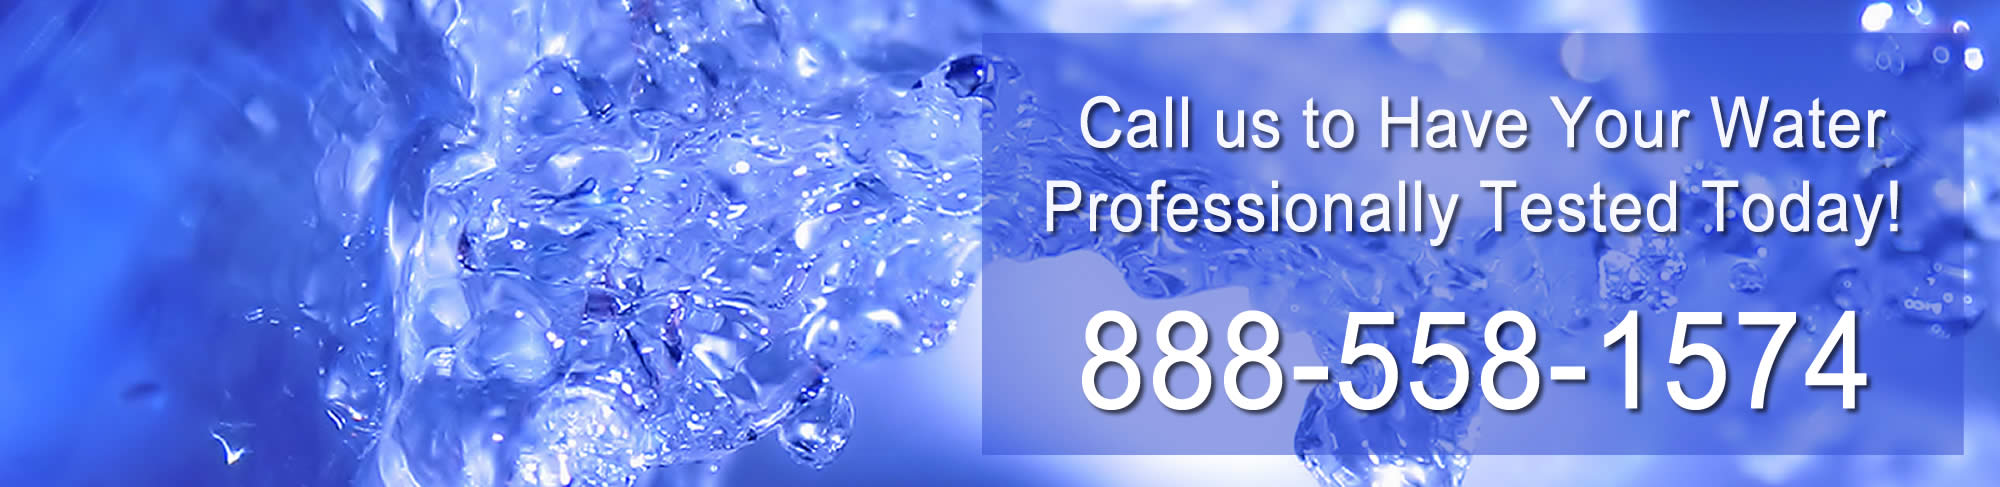 Specializing in East Windsor CT Water Testing and Analysis